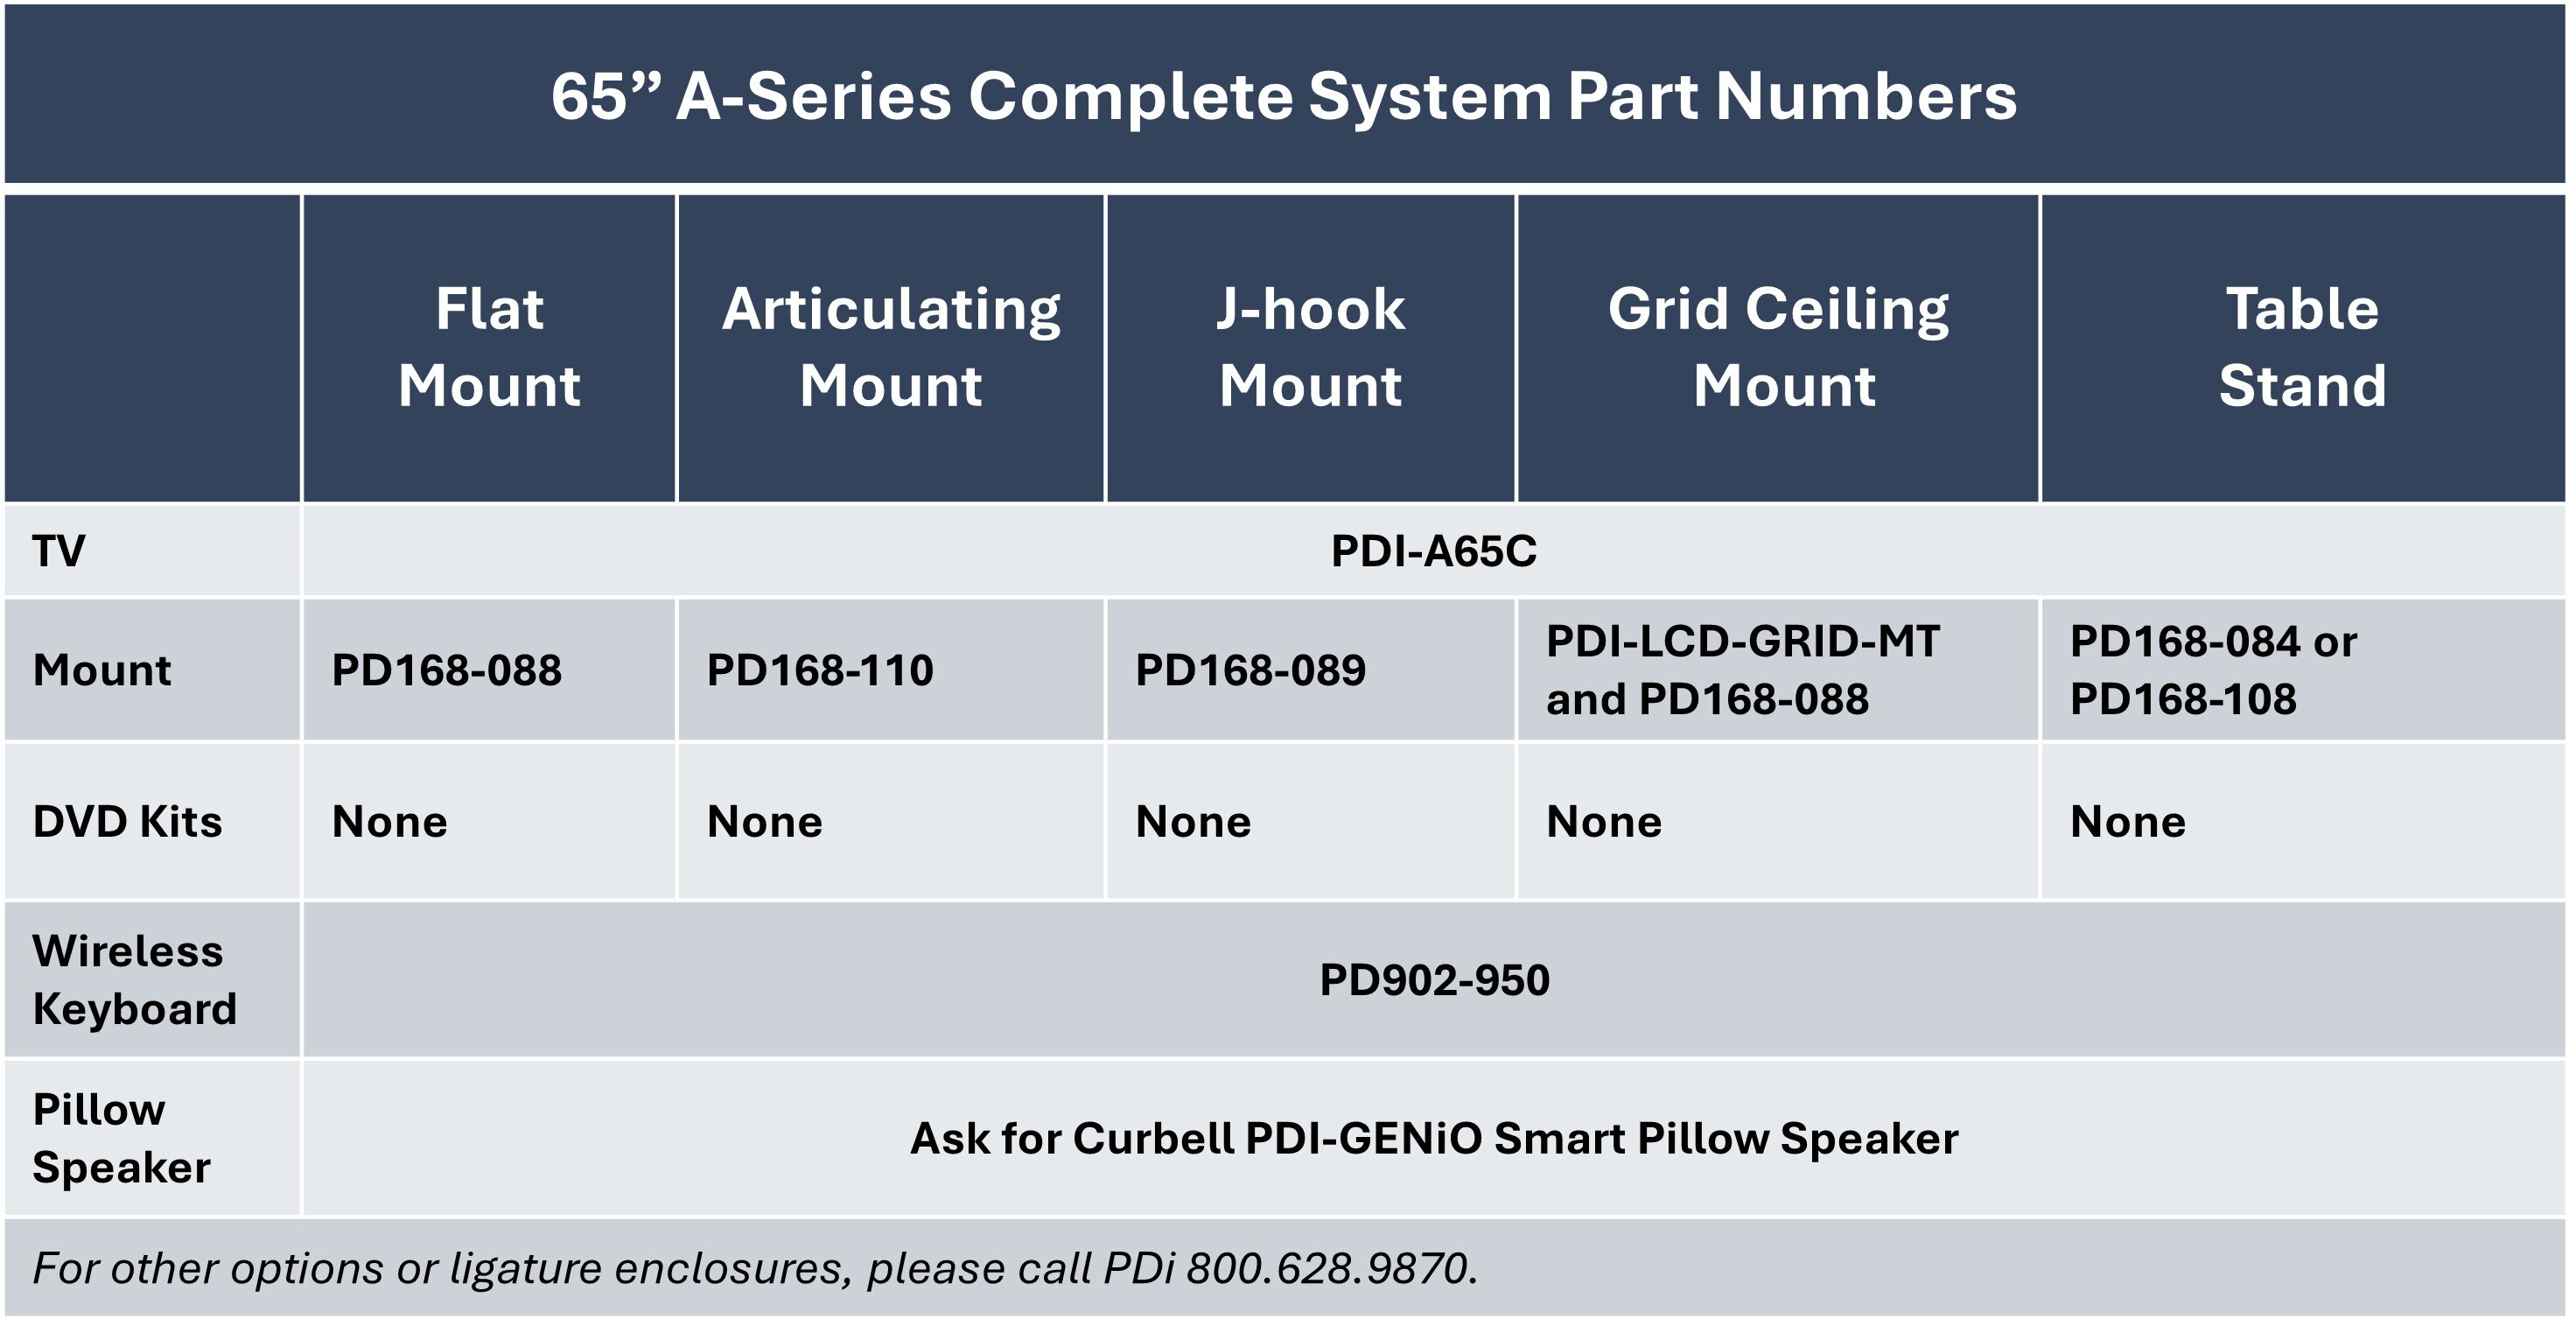 PDi Part Numbers for Complete 65